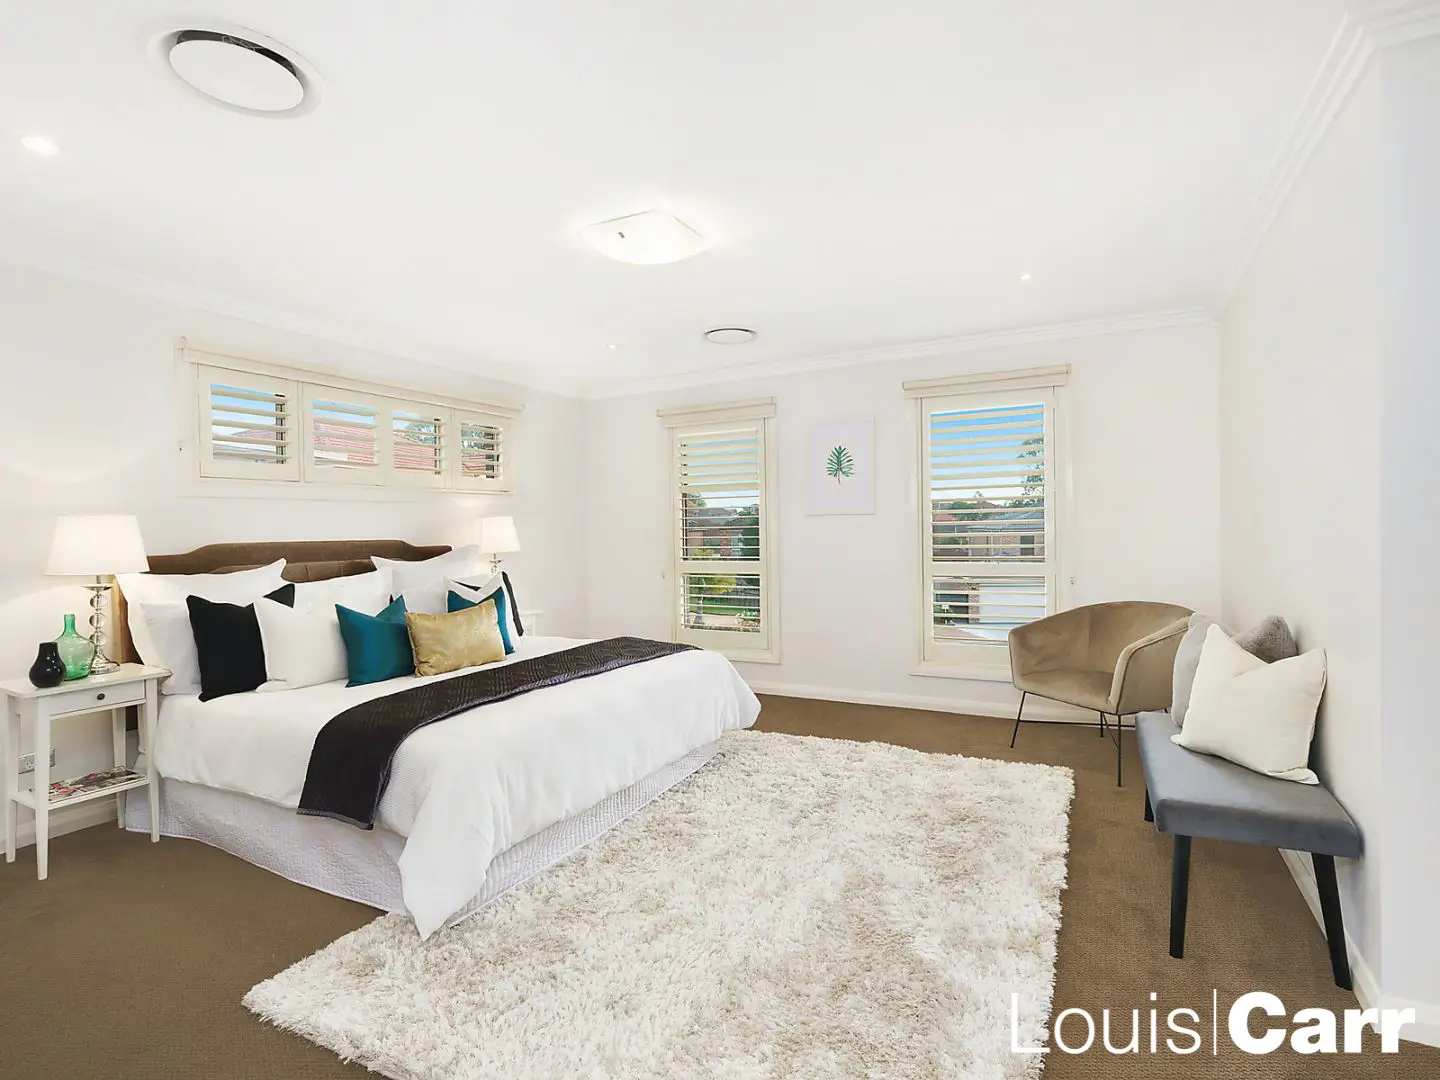 Photo #5: 22 Blundell Circuit, Kellyville - Sold by Louis Carr Real Estate